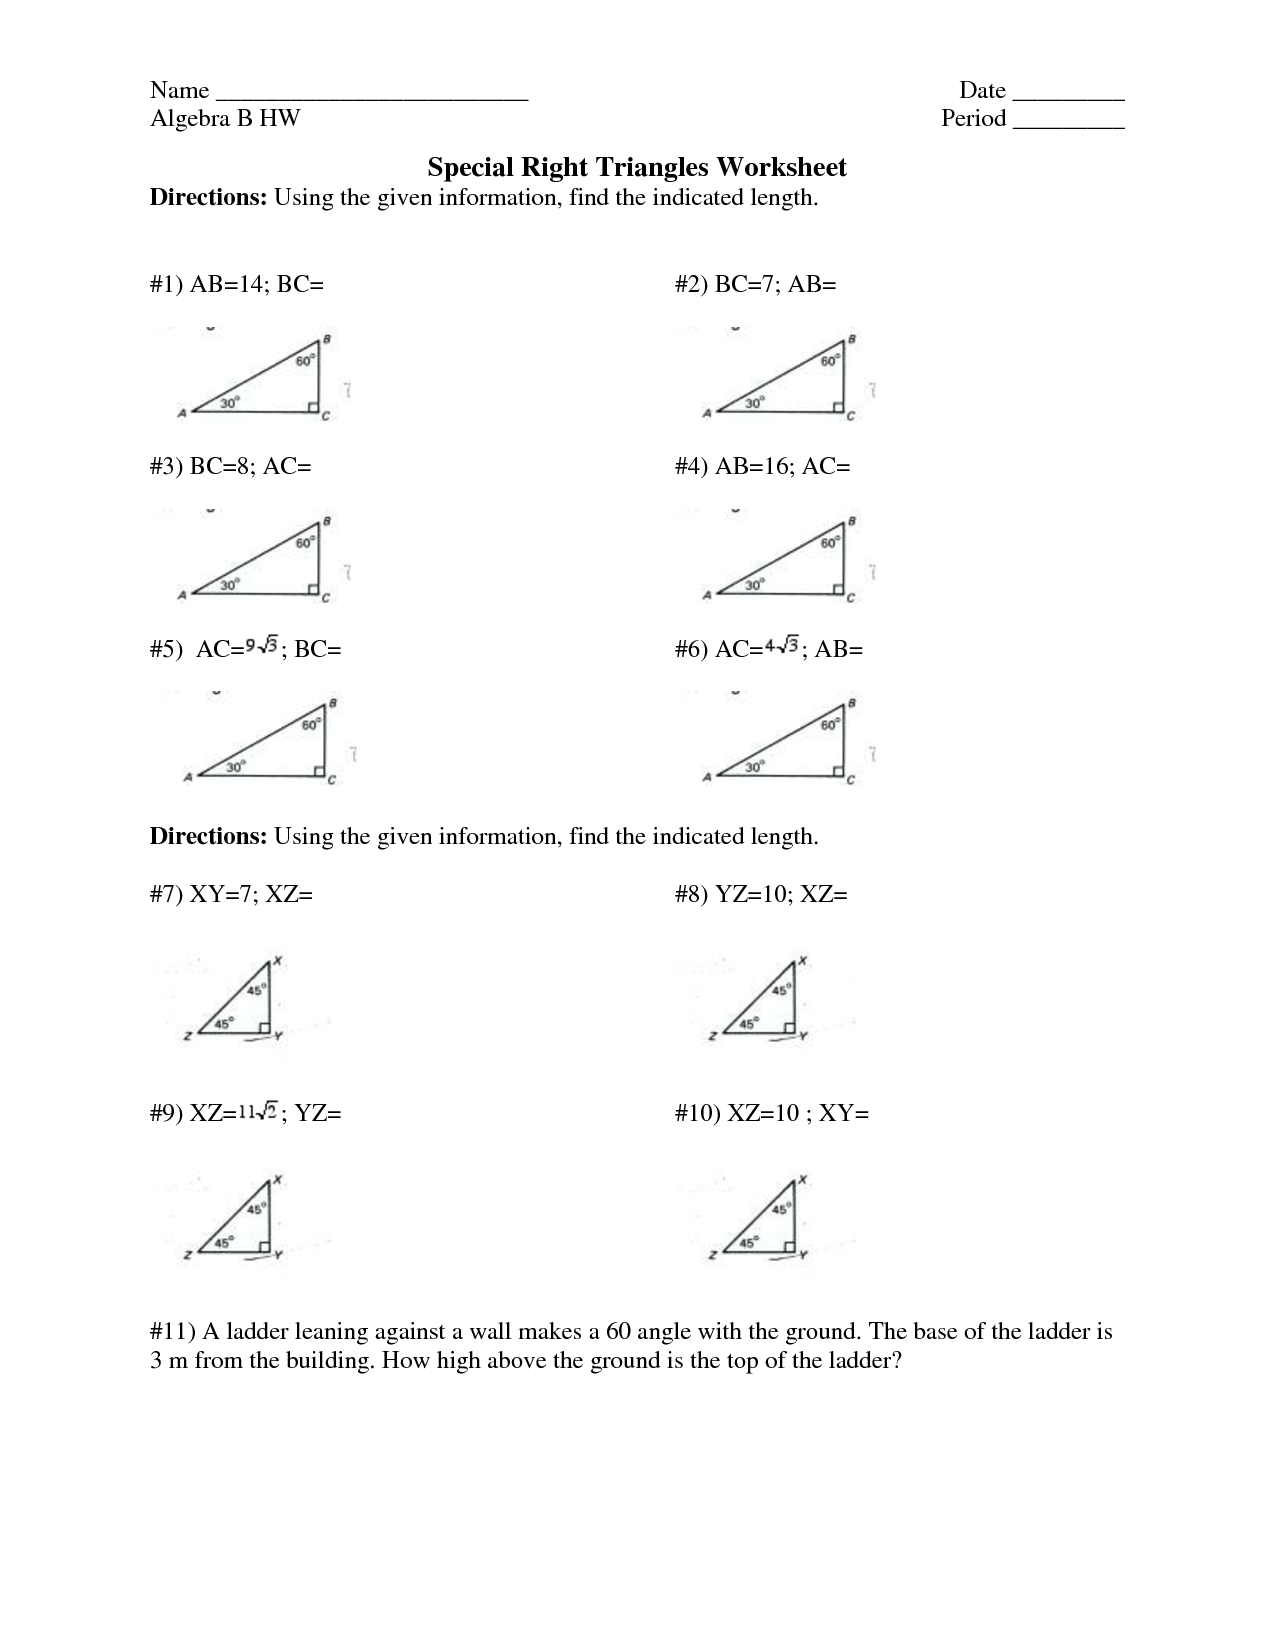 Special Right Triangles Worksheet Image